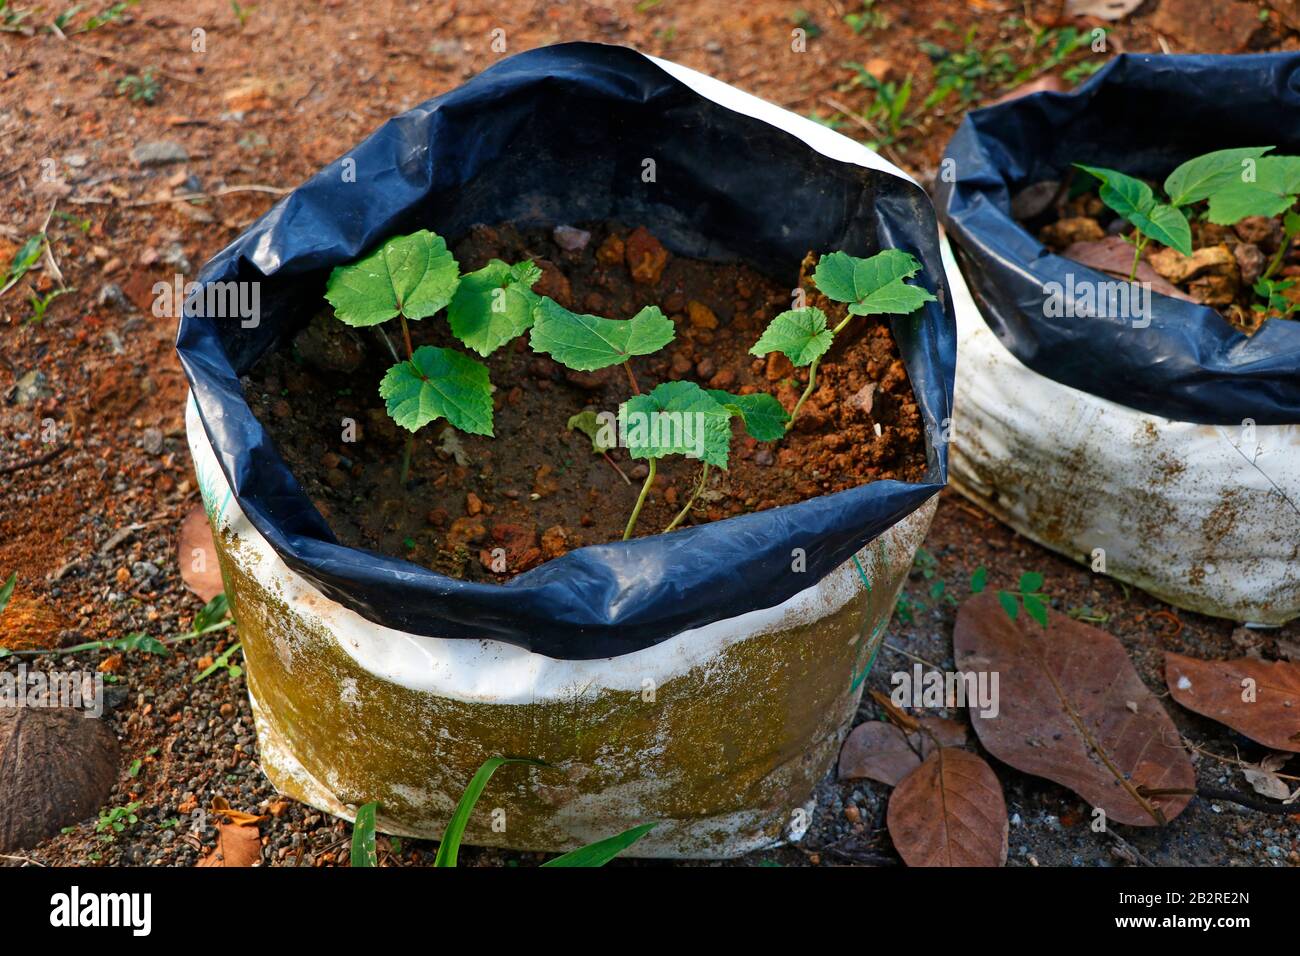 Plants and vegetables growing in growbag Stock Photo